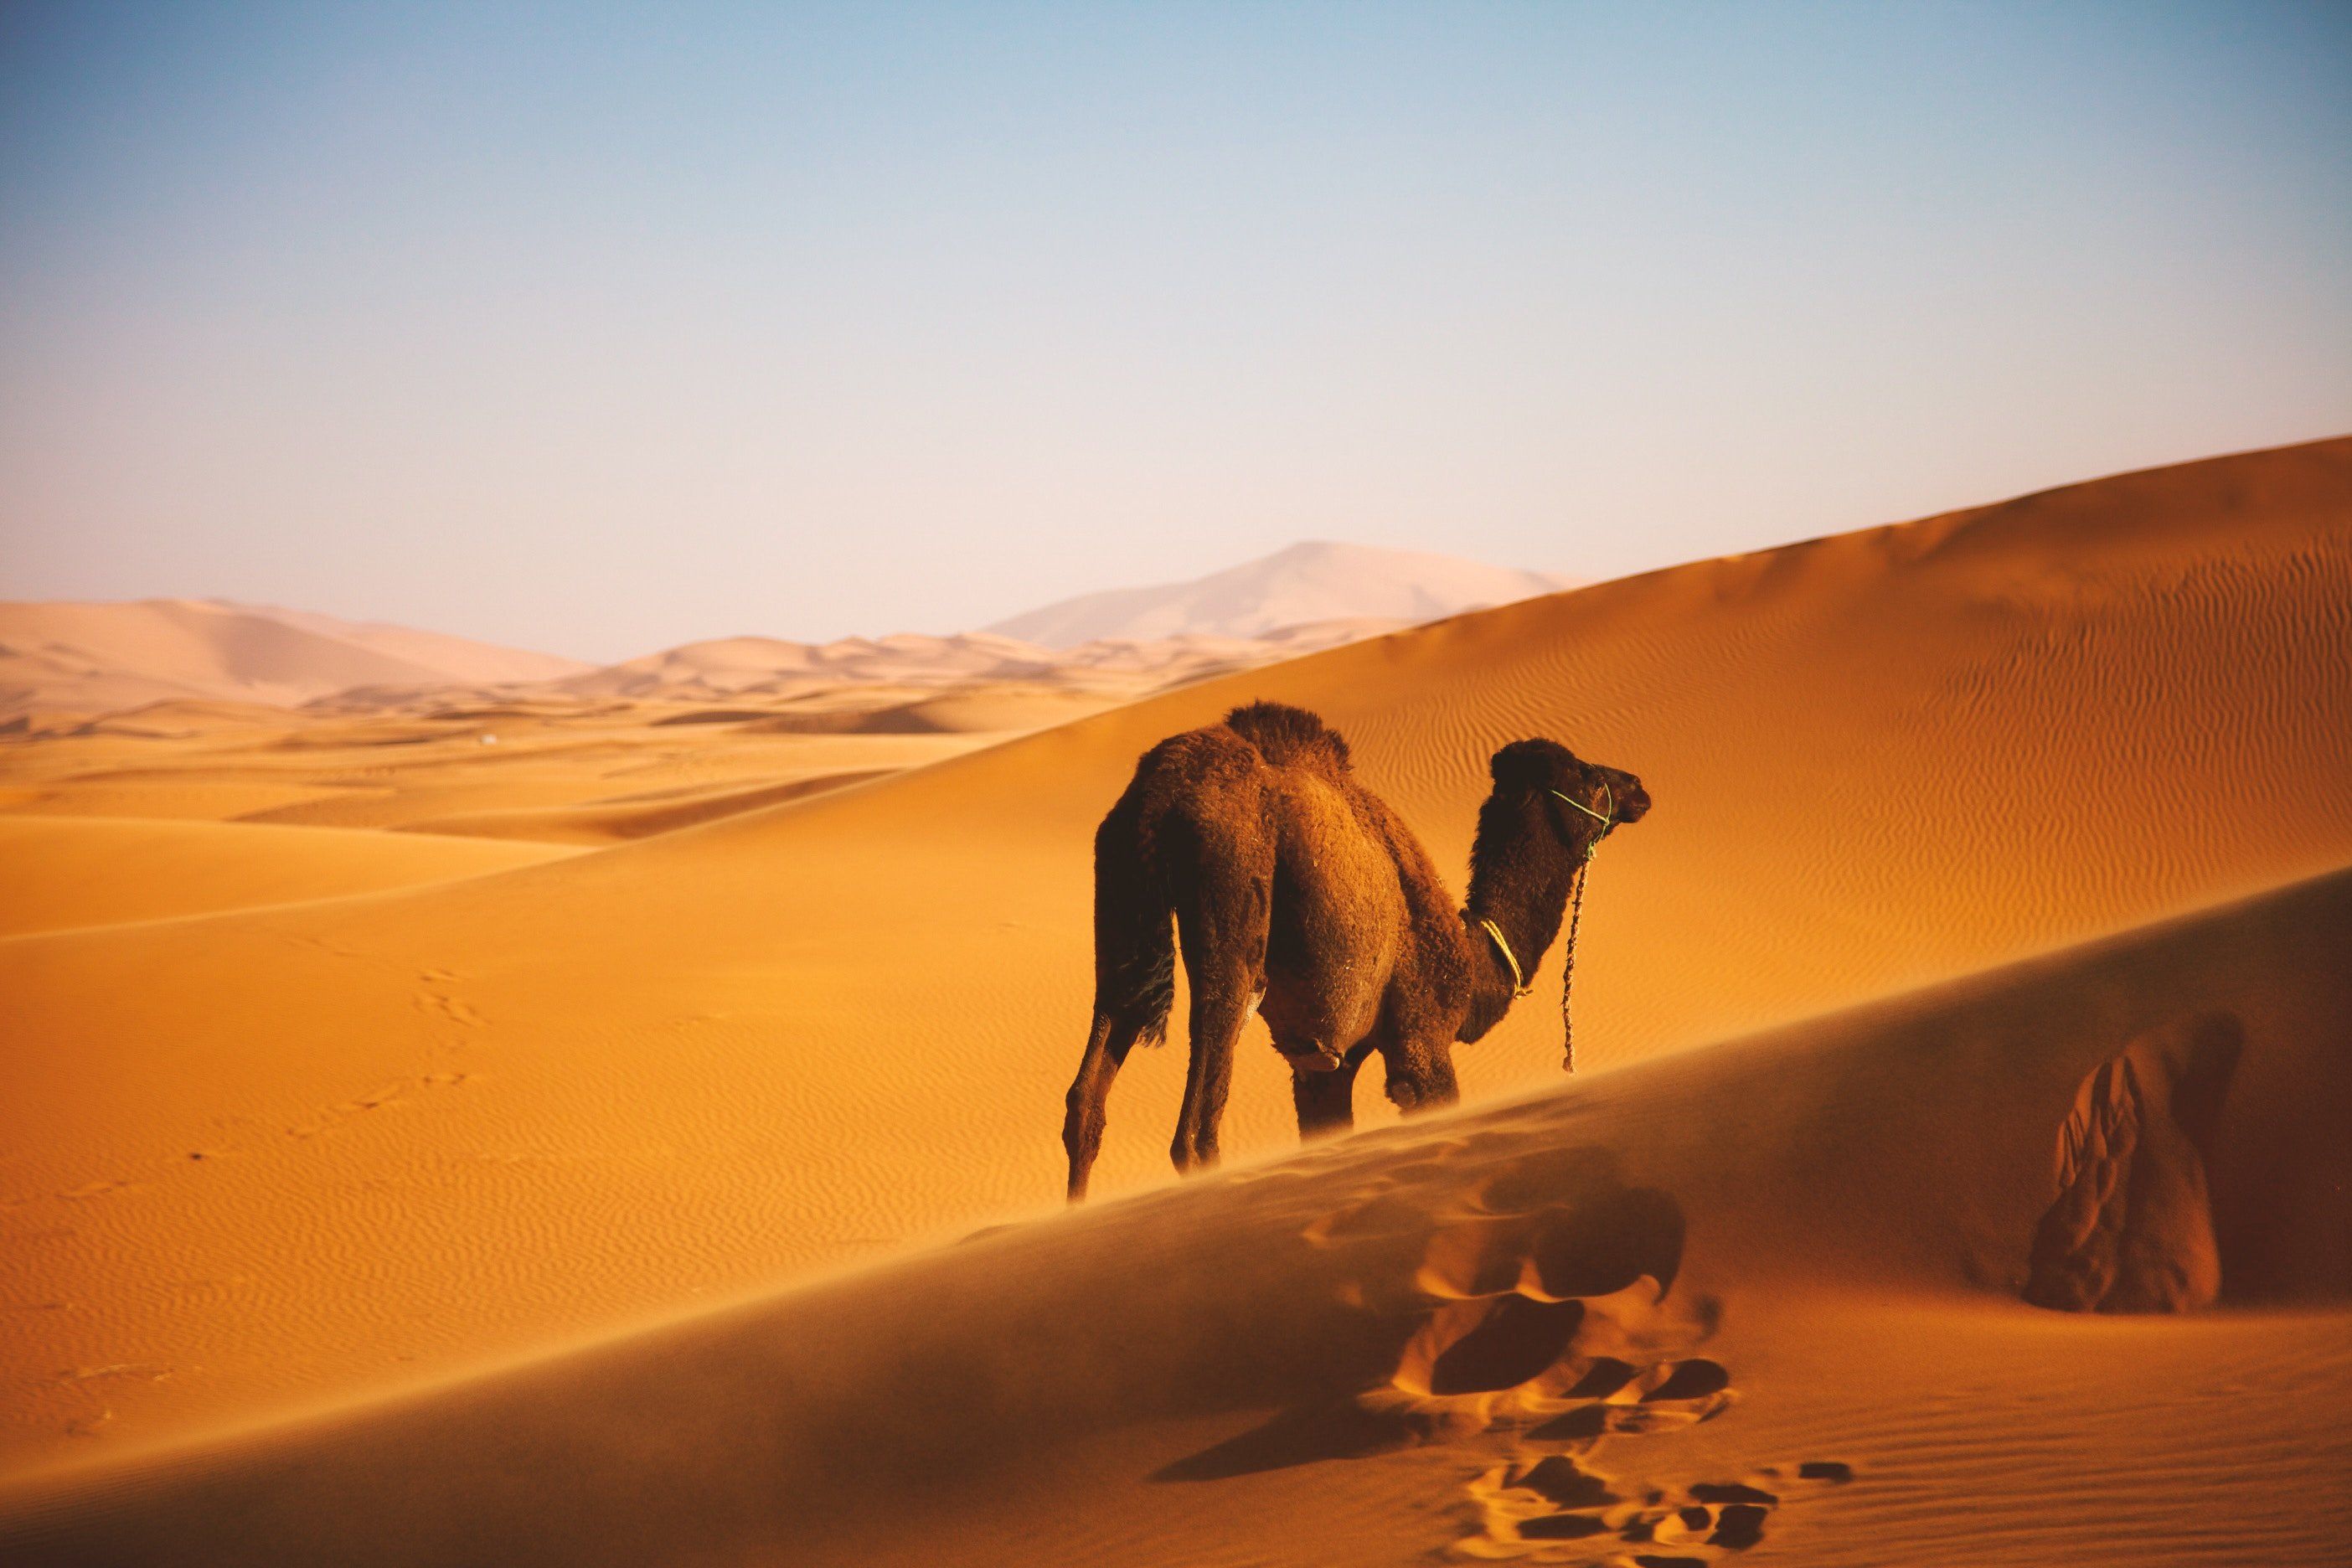 Camel 4K wallpaper for your desktop or mobile screen free and easy to download